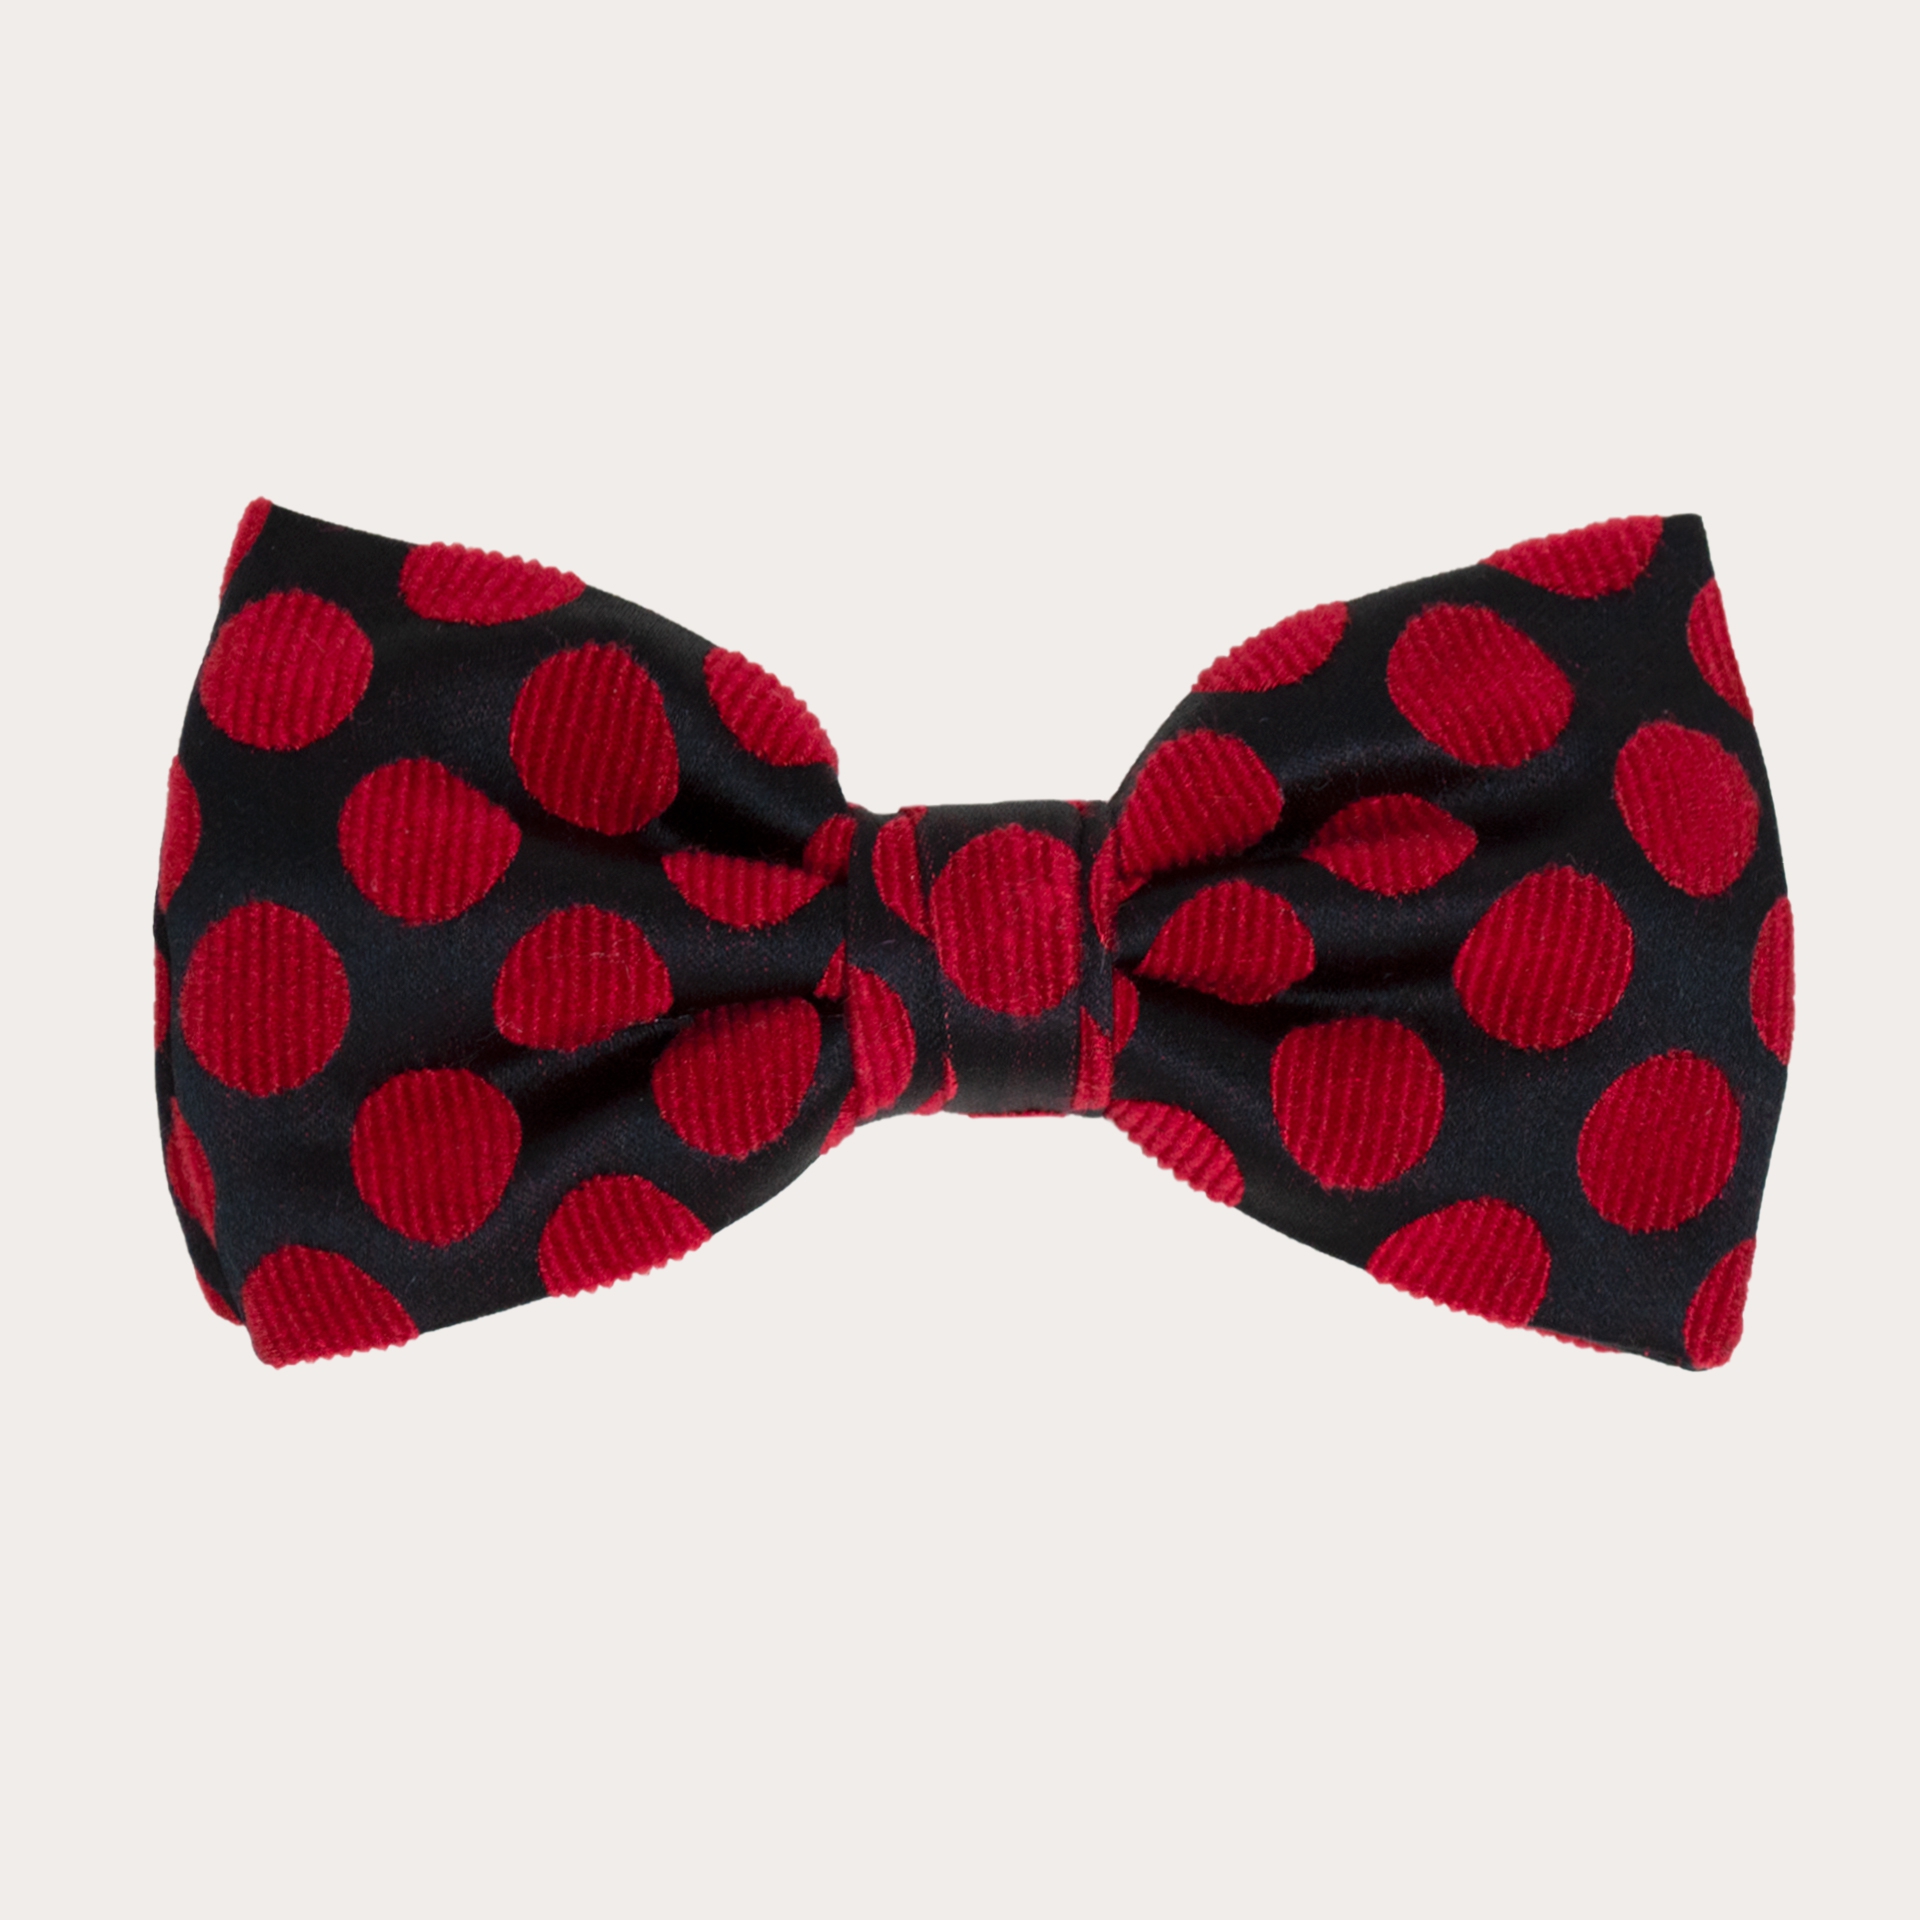 BRUCLE Silk Pre-tied Bow tie, black red dot